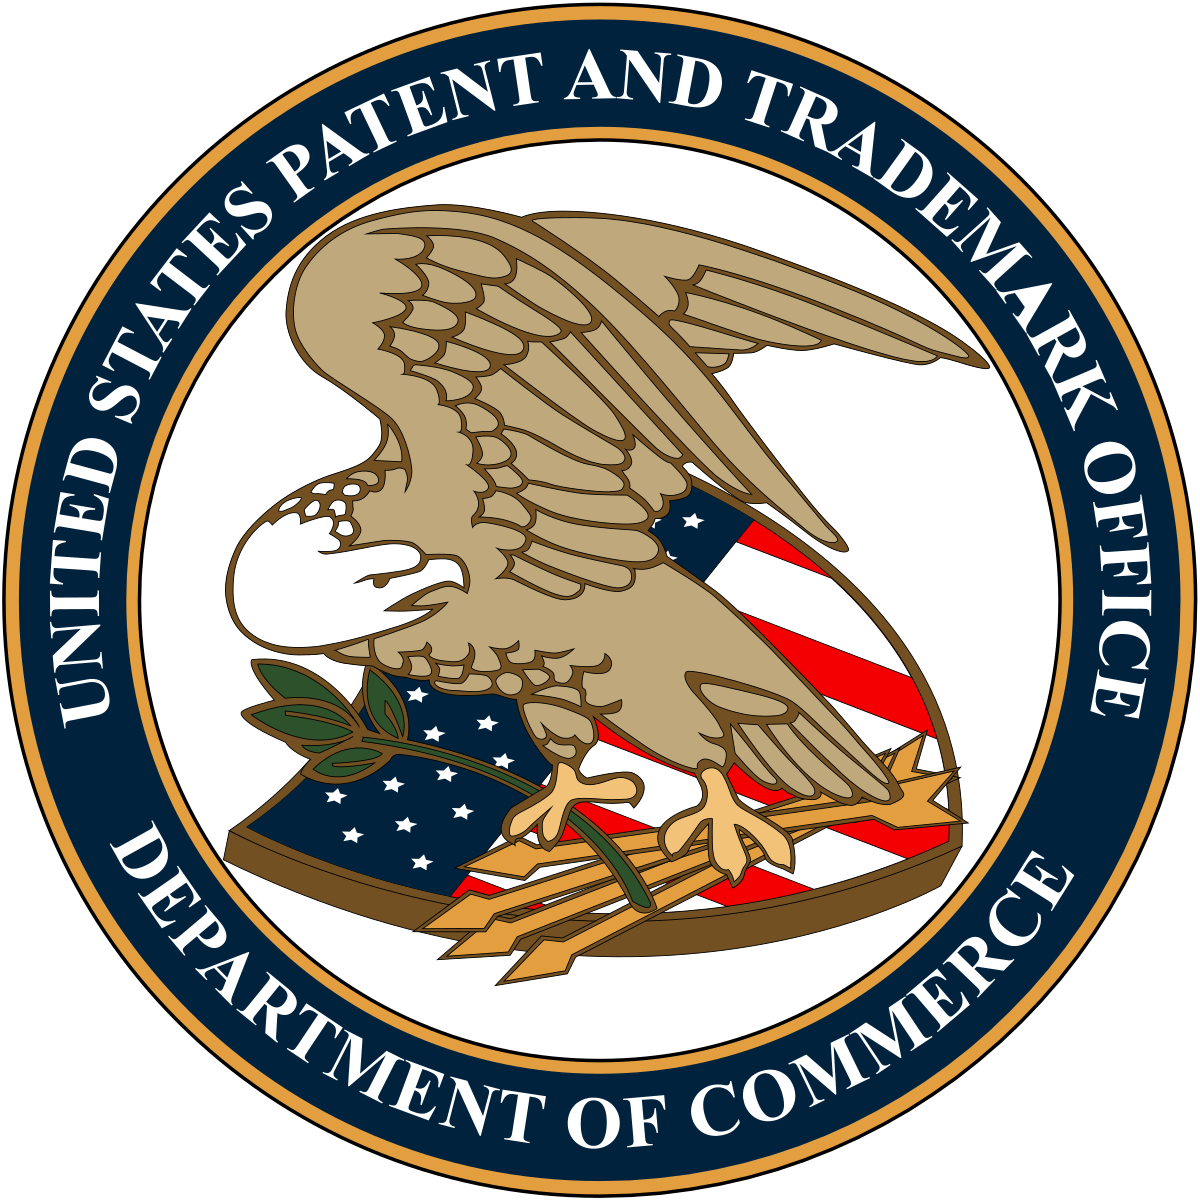 United States Patent and Trademark Office (USPTO)